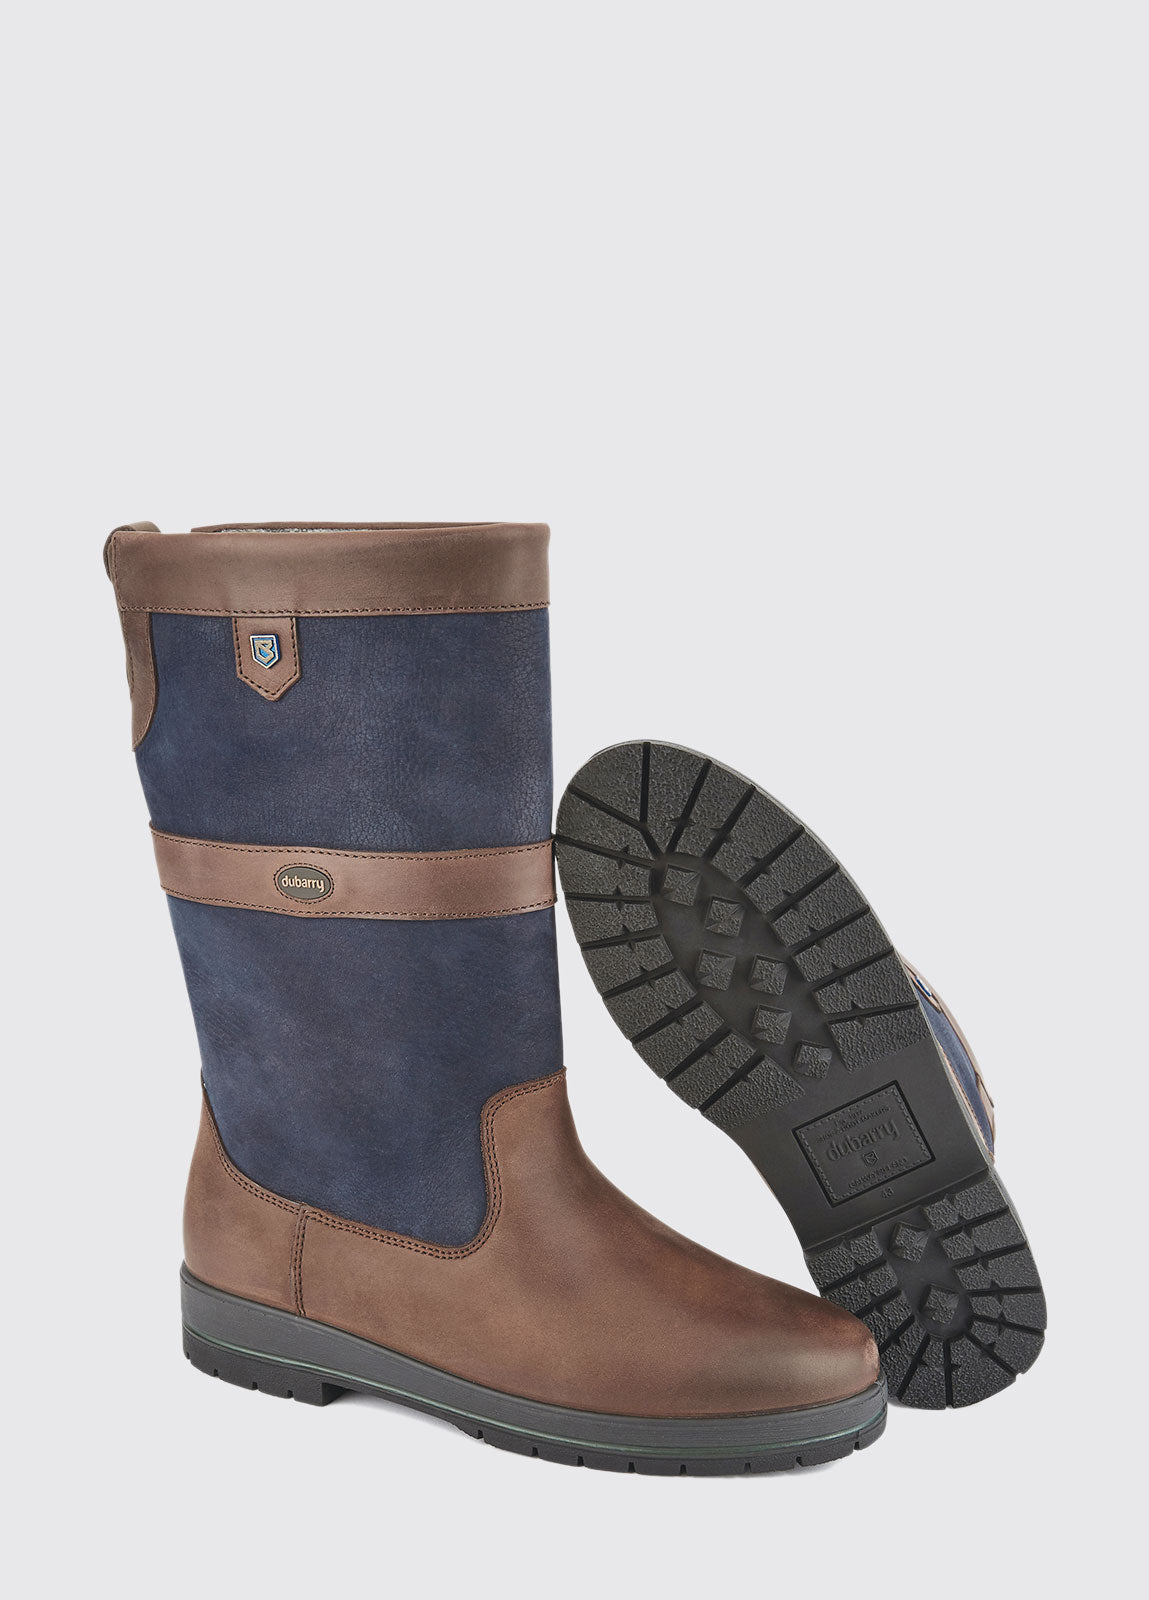 Kildare ExtraFit Country Boot - Navy/Brown